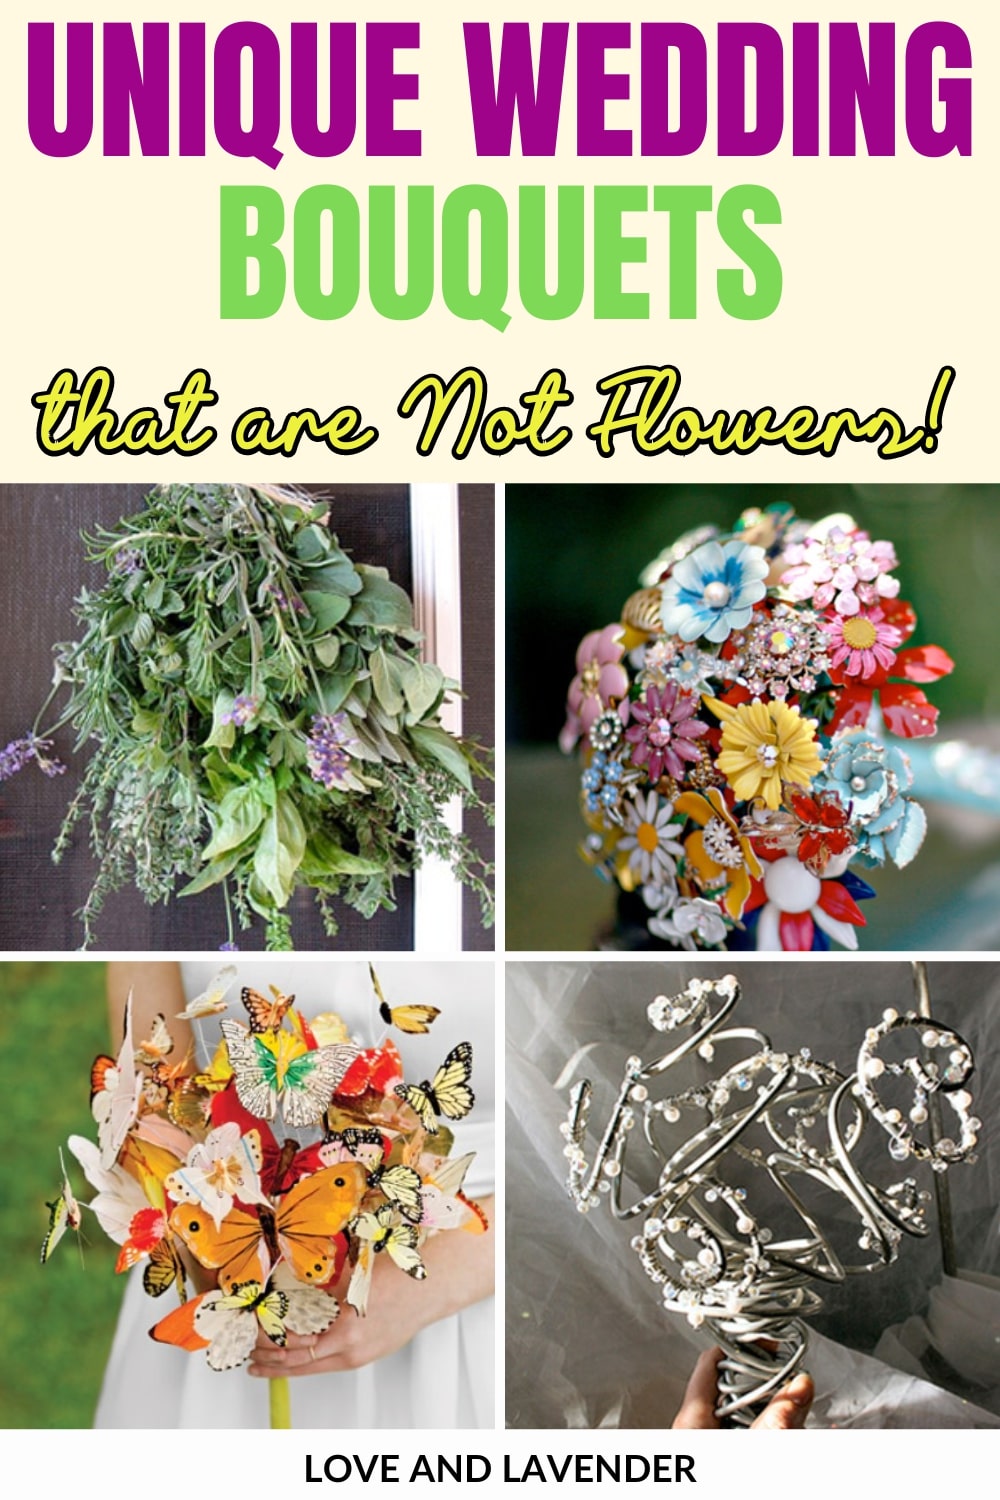 15 Non Floral Bouquets: Feathers, Wheat, Sola Flowers, and more